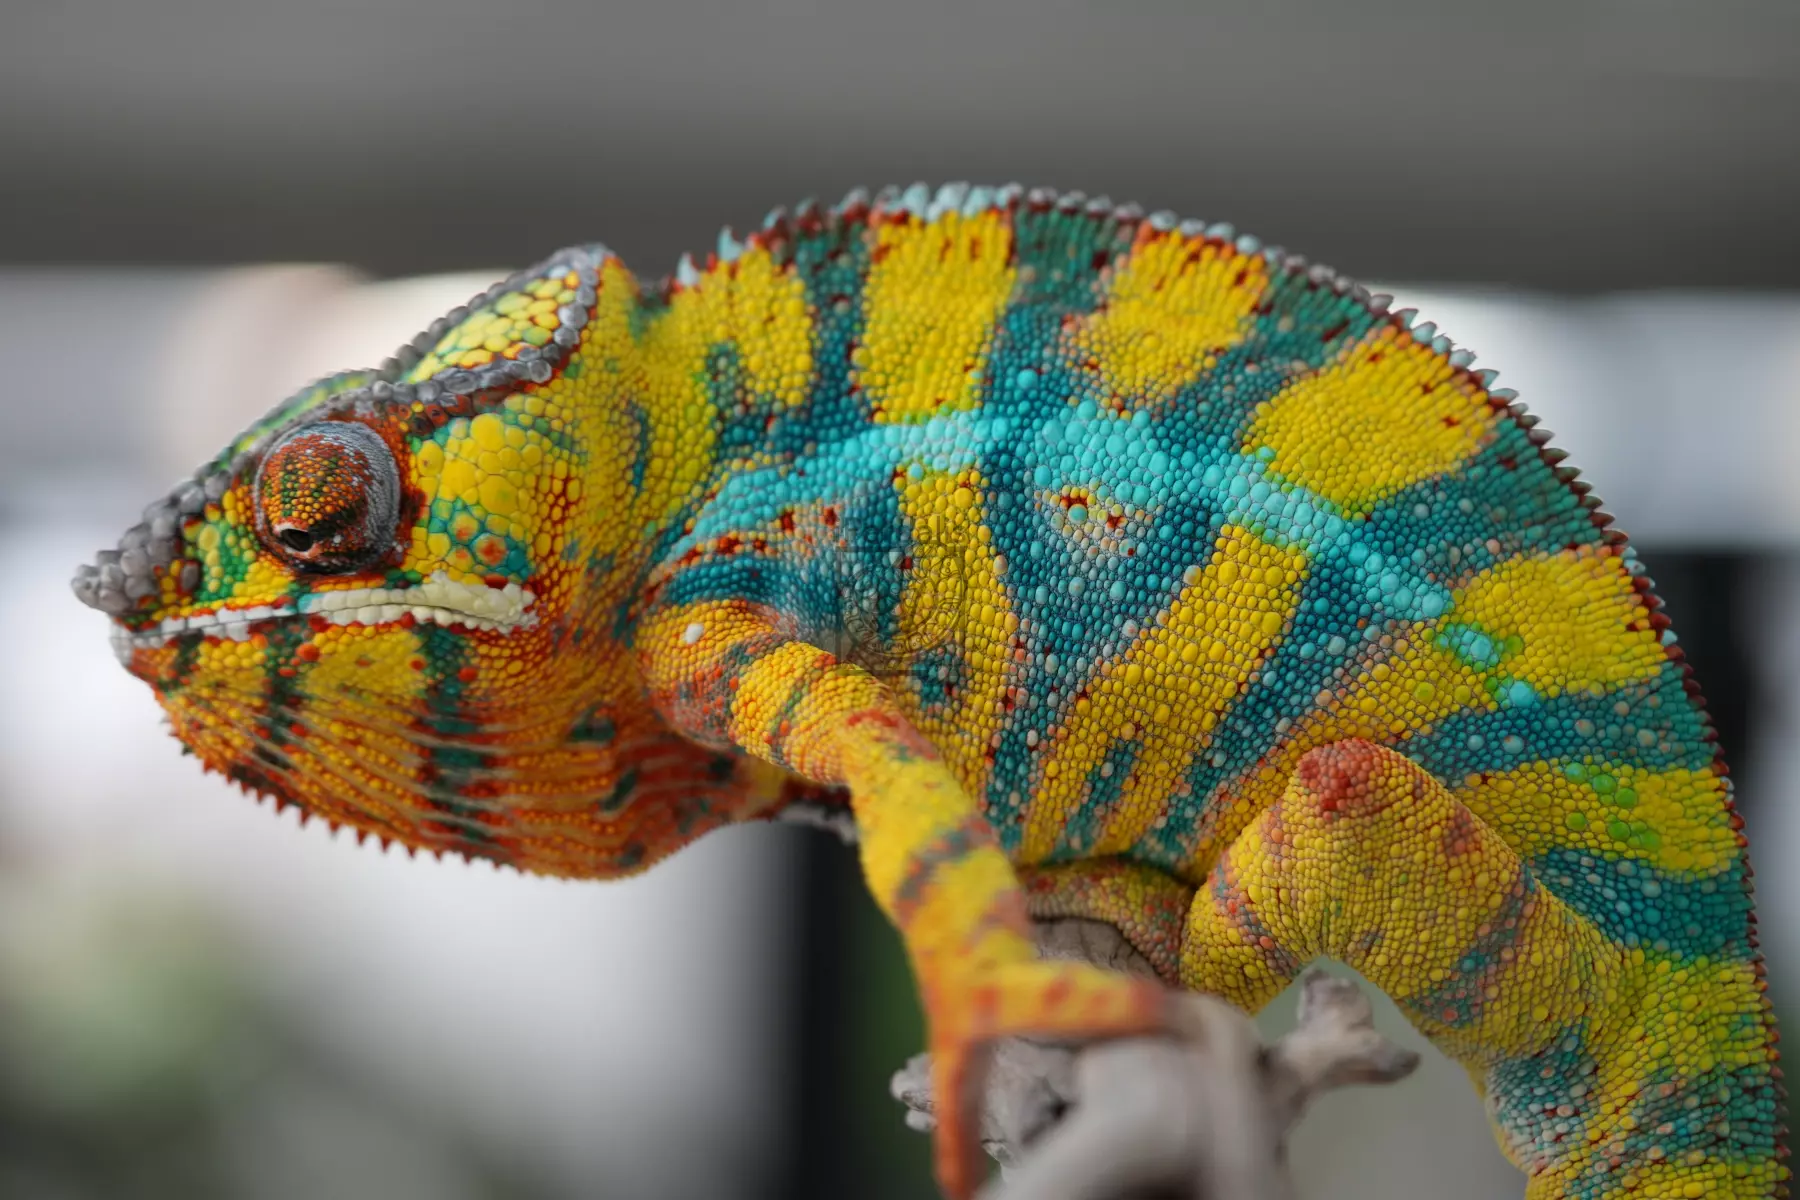 Panther Chameleon - Papafee